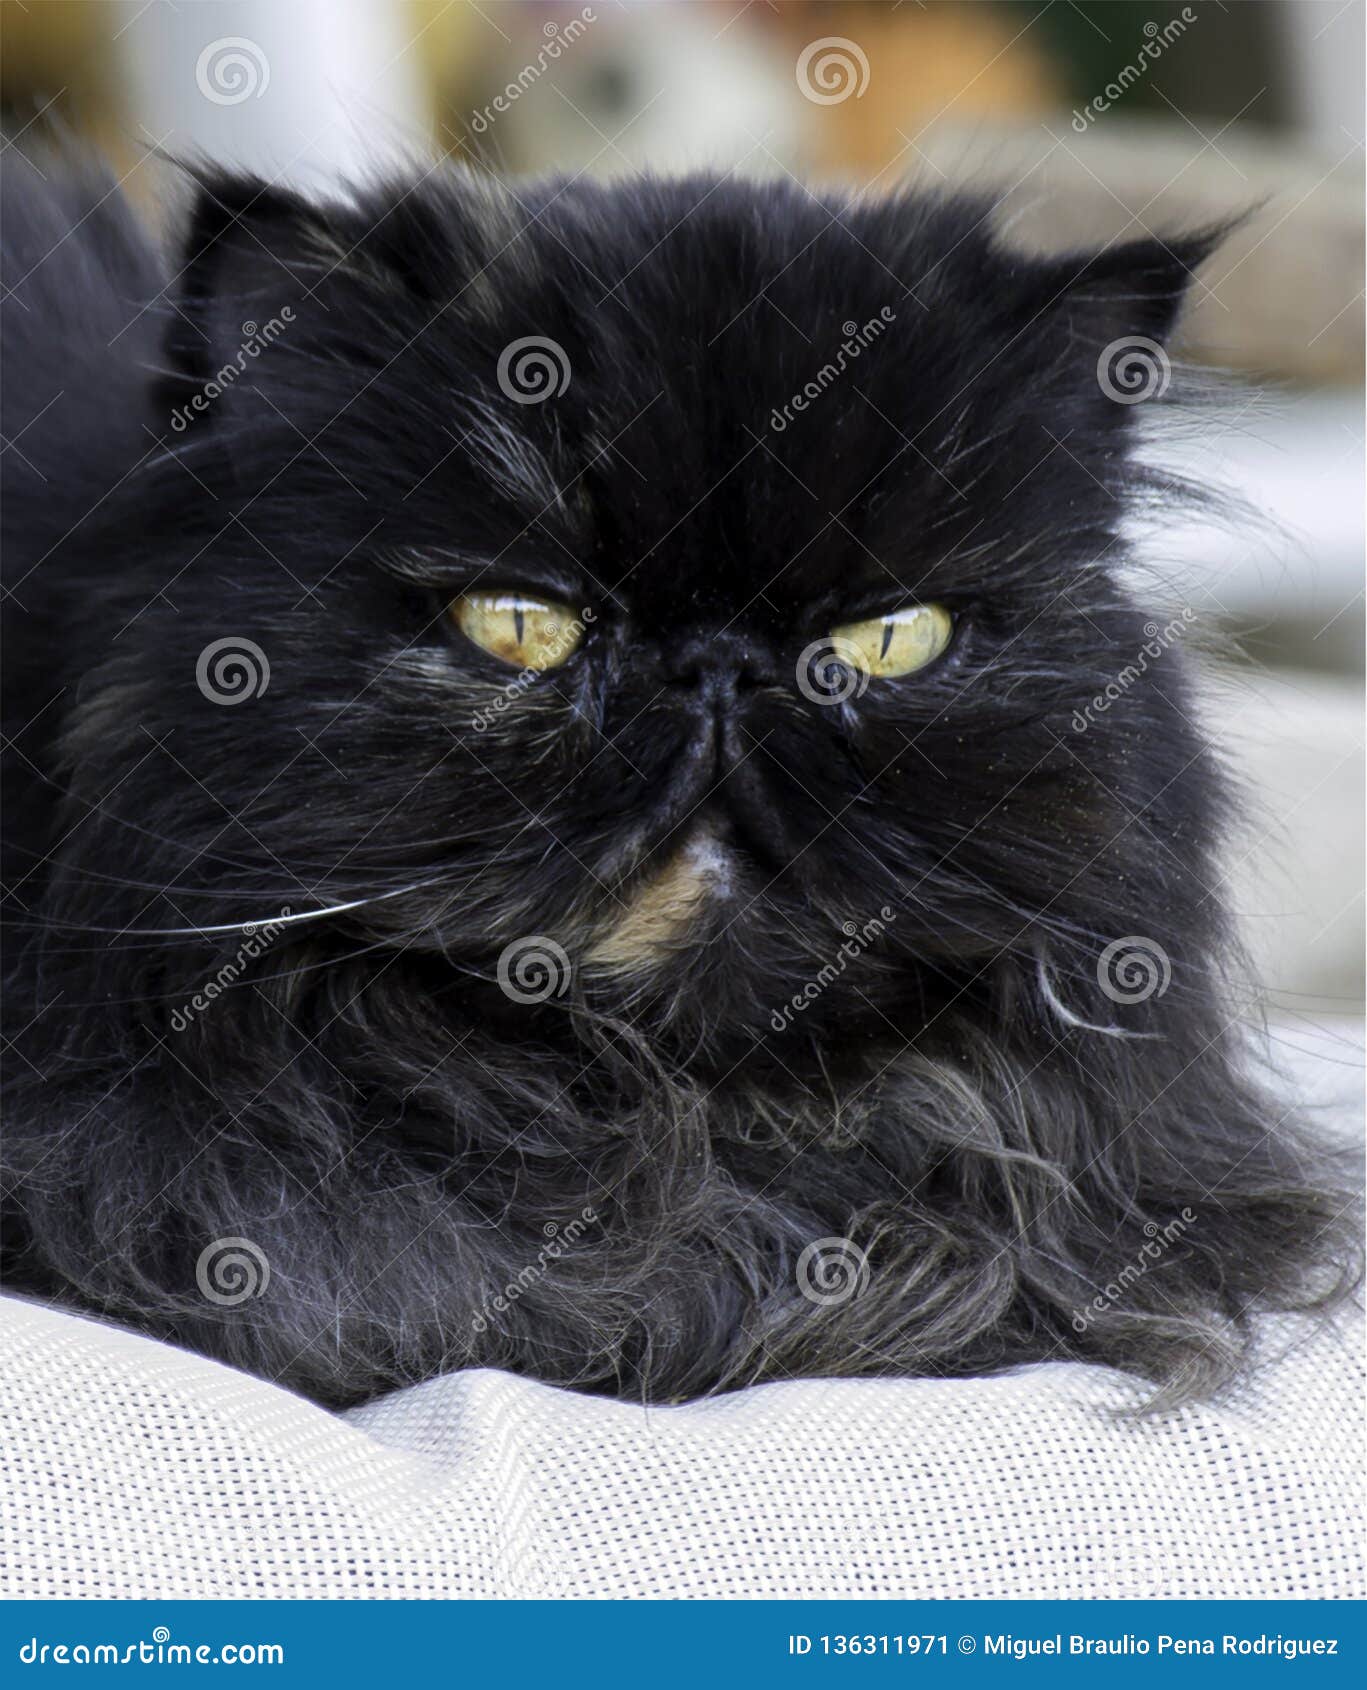 persian cat color dark smoke looking with great interest